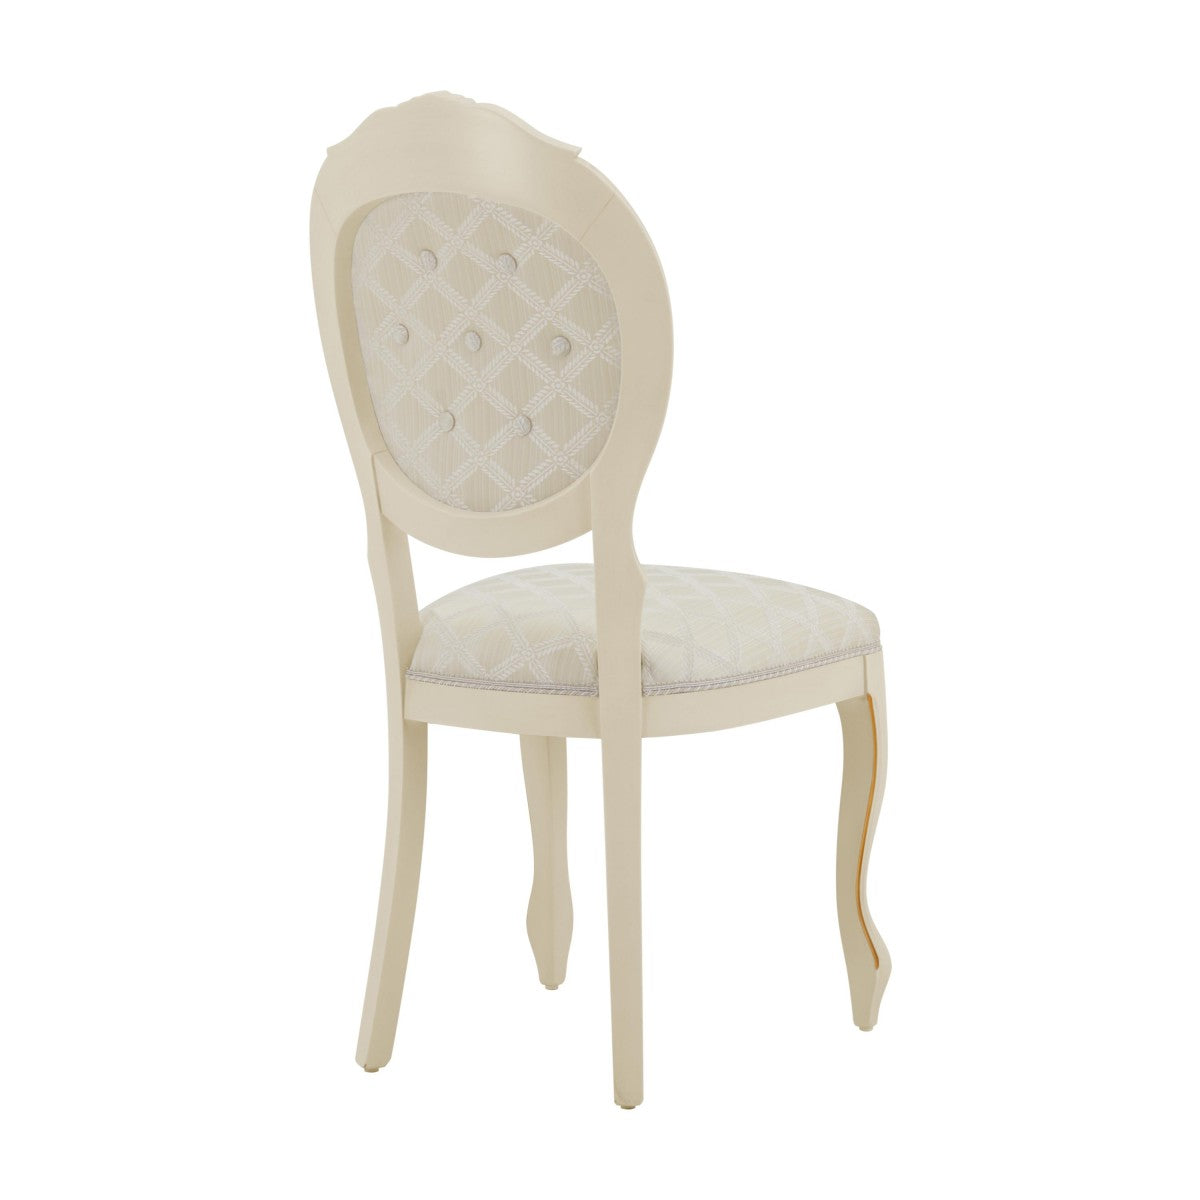 Sabry Bespoke Upholstered Classic Dining Chair MS206S Custom Made To Order